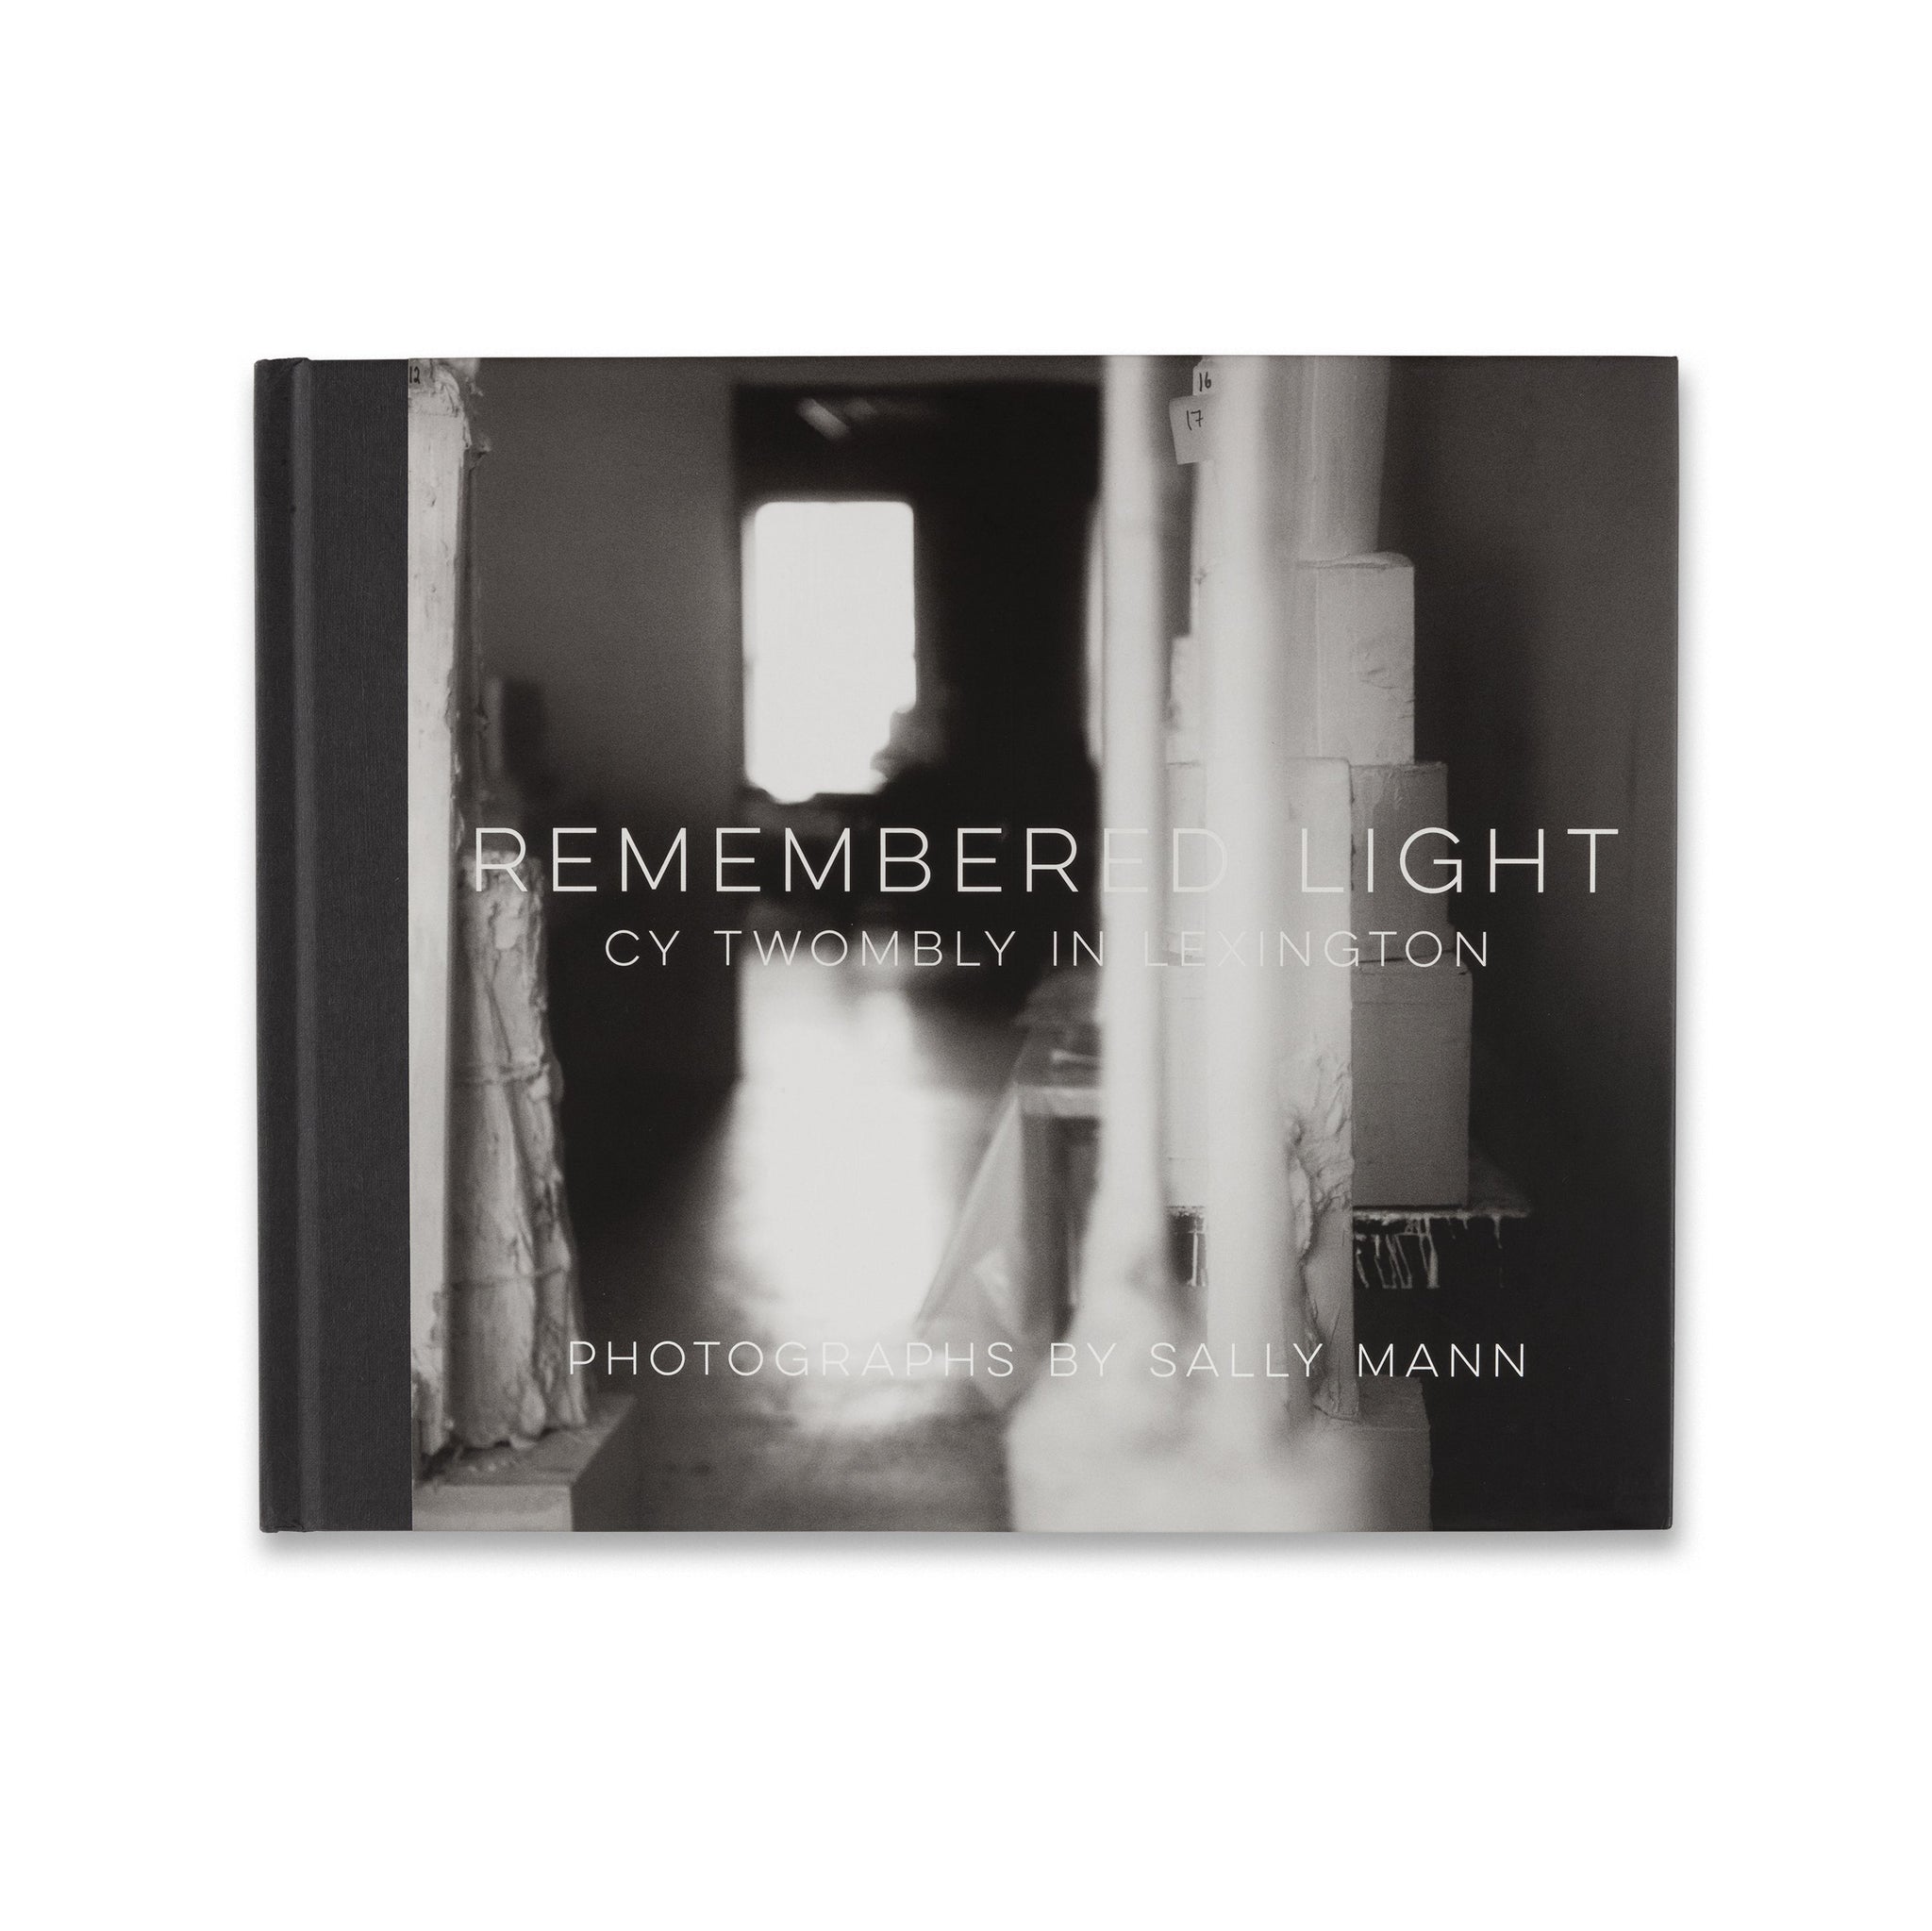 Cover of the book Remembered Light: Cy Twombly in Lexington, featuring photographs by Sally Mann